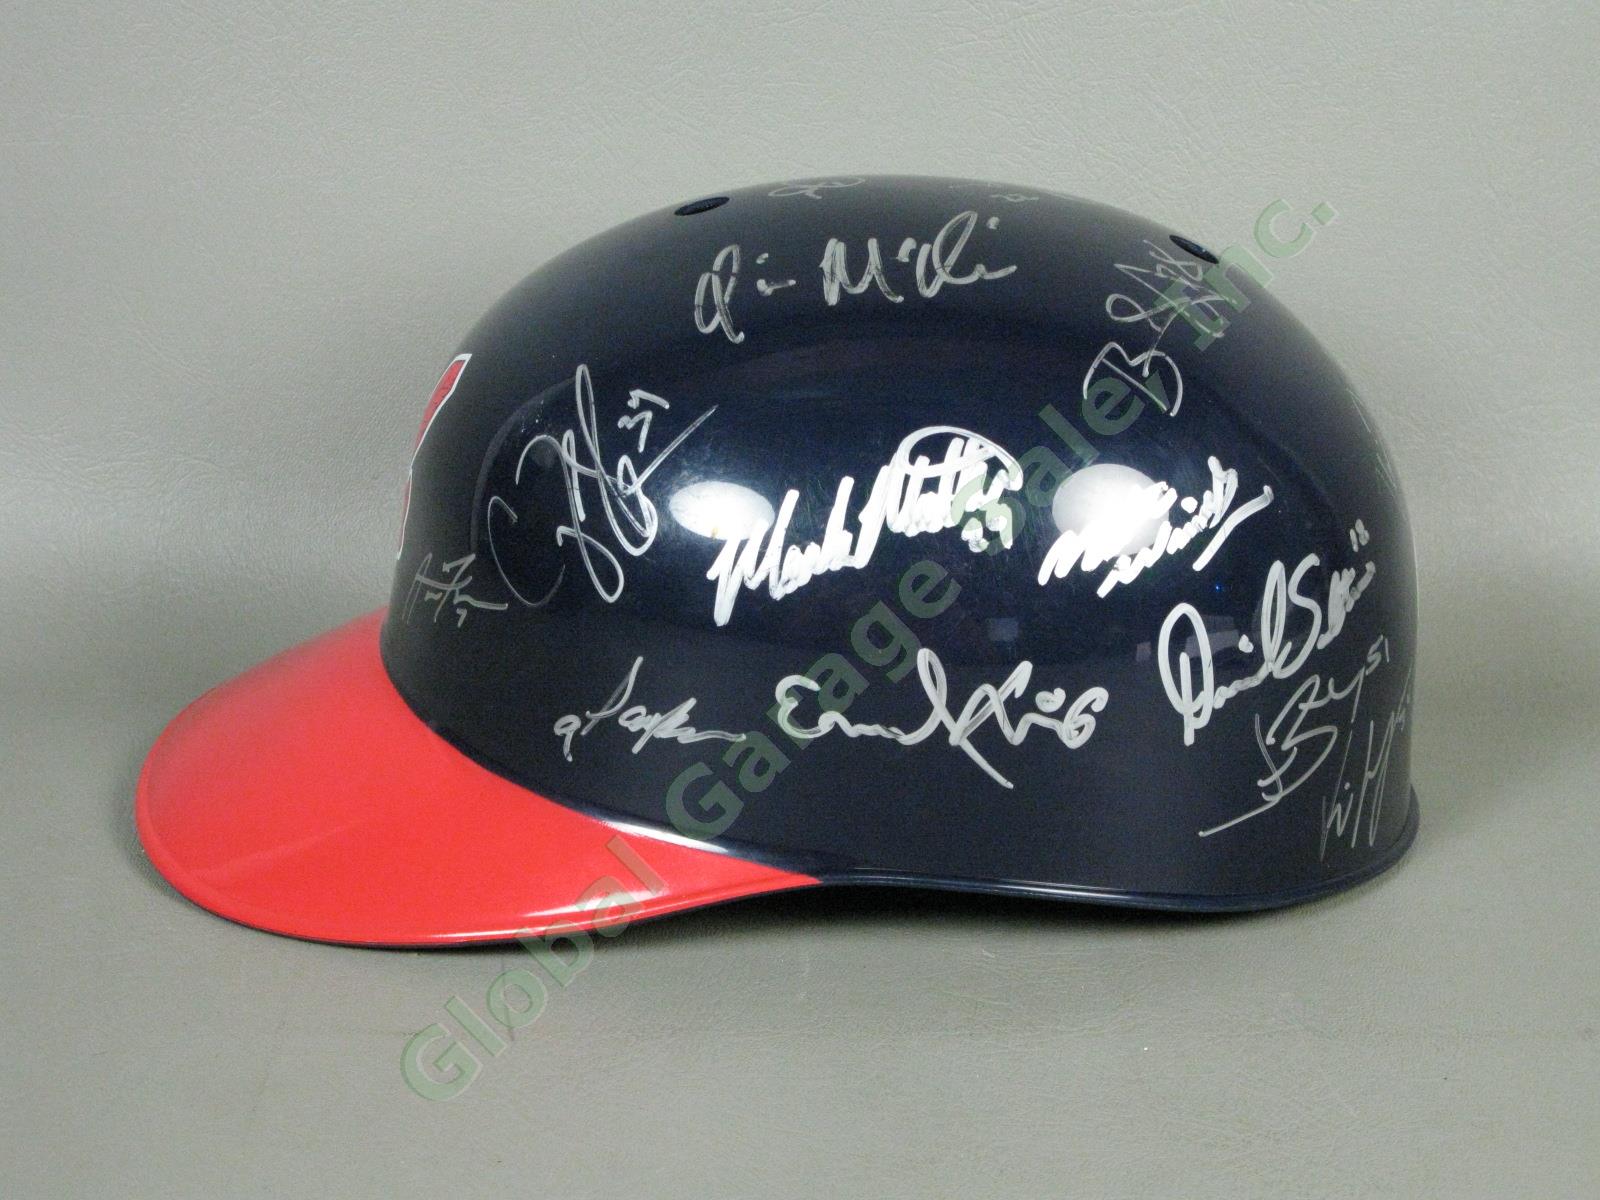 2015 Mahoning Valley Scrappers Team Signed Baseball Helmet Cleveland Indians NR 3